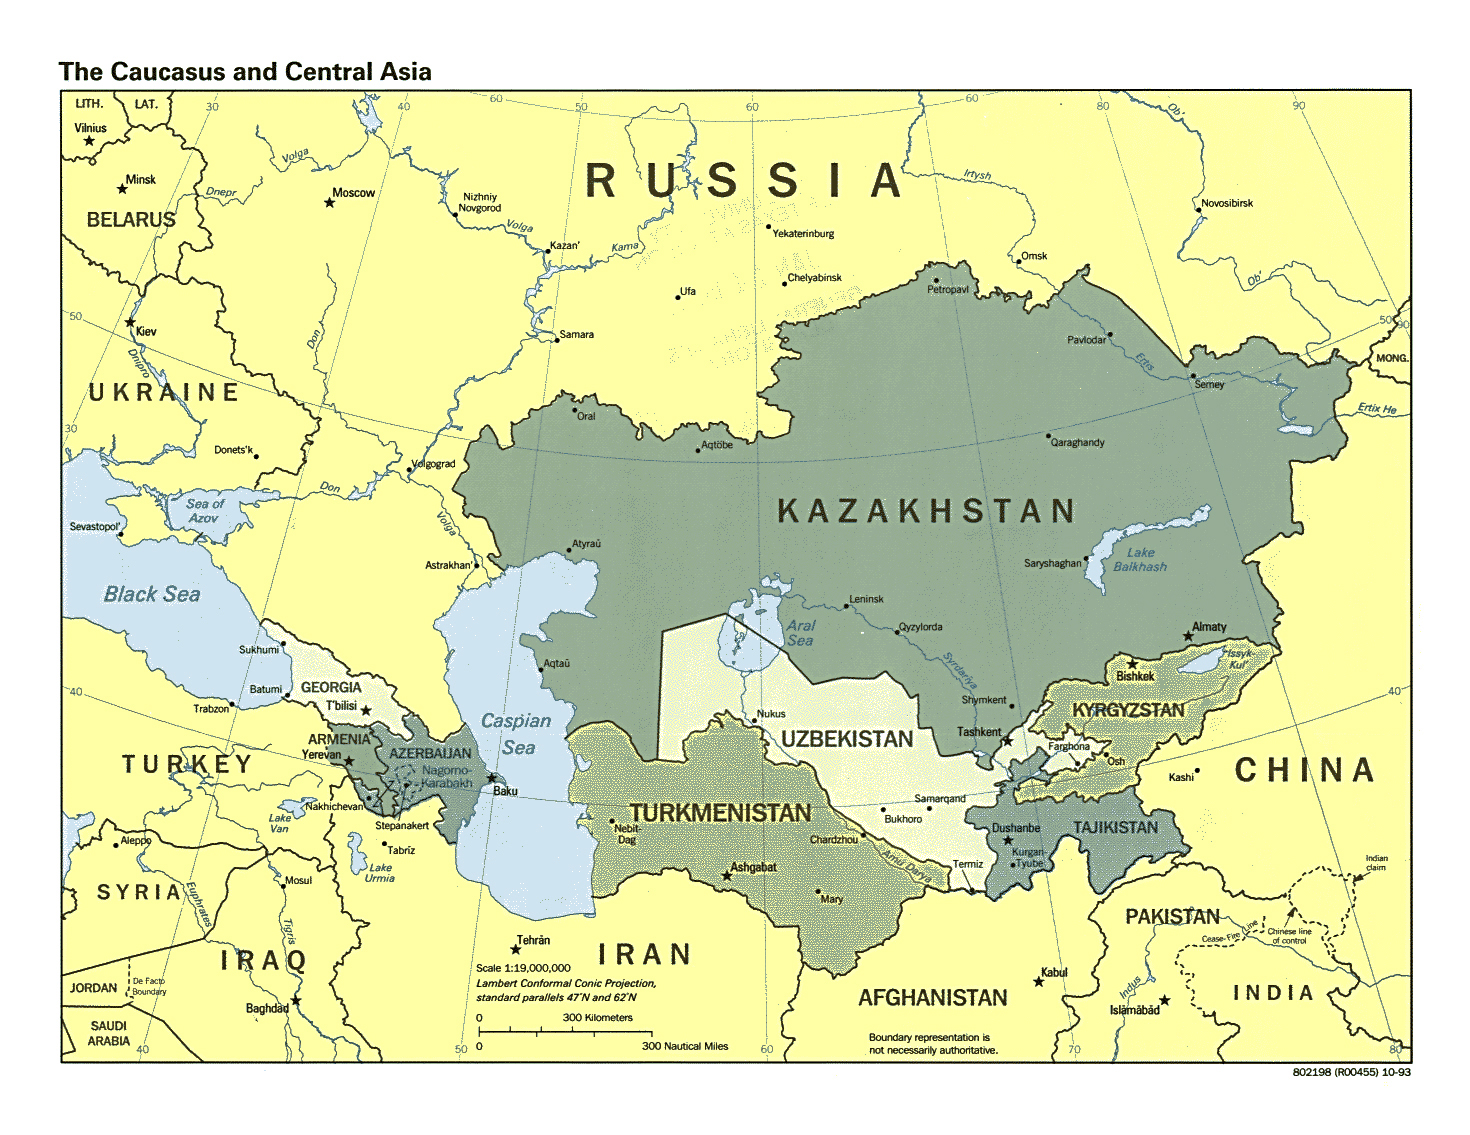 Detailed Political Map Of The Caucasus And Central Asia With